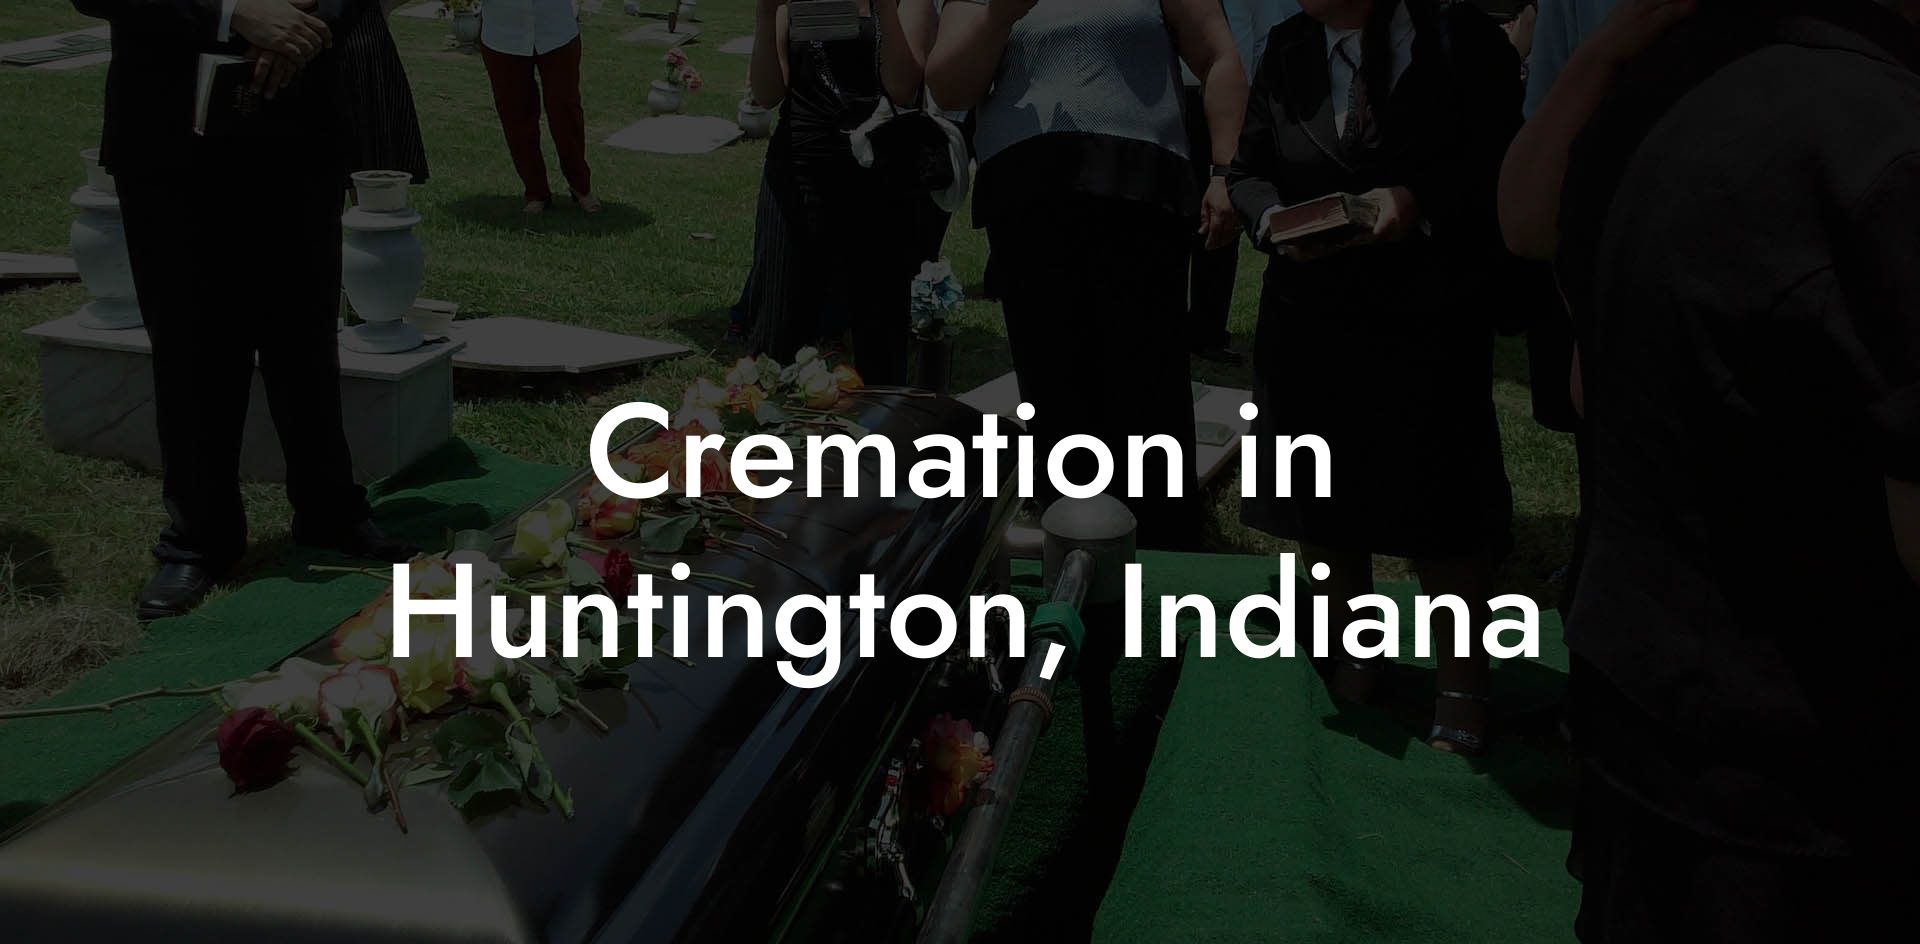 Cremation in Huntington, Indiana